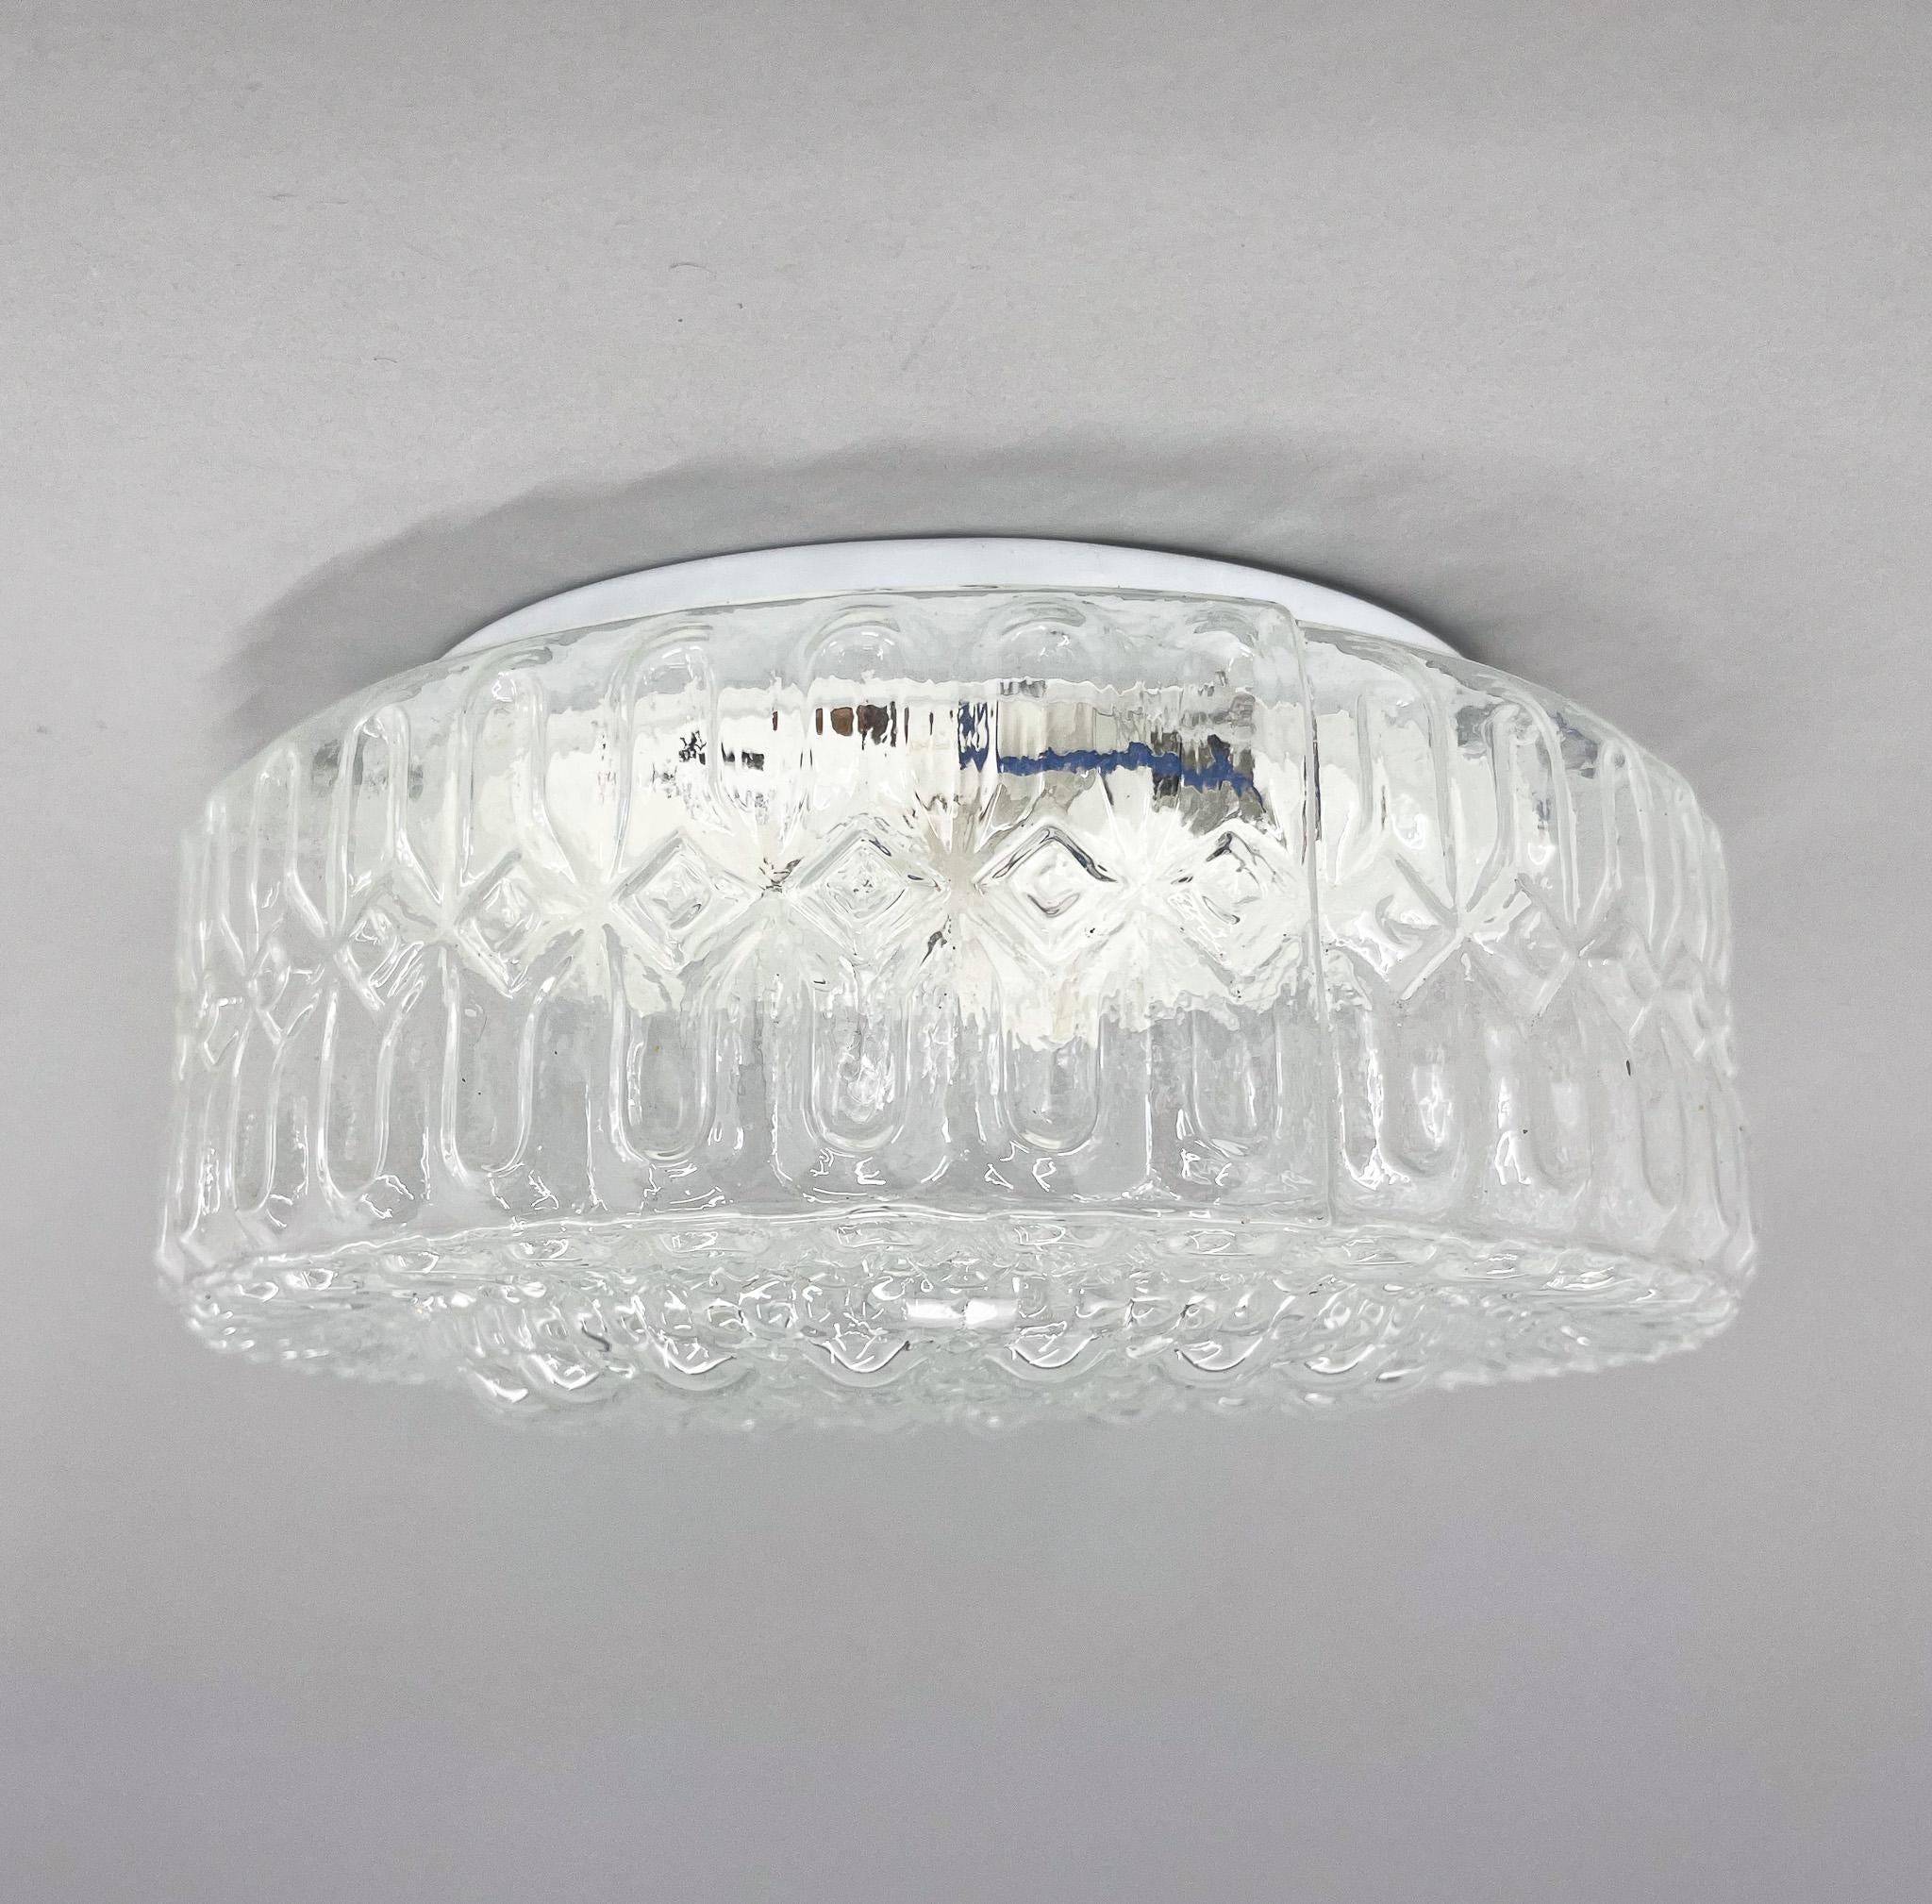 Vintage flush mount or ceiling light made of clear glass and metal. Bulb: 1 x E25-E27.